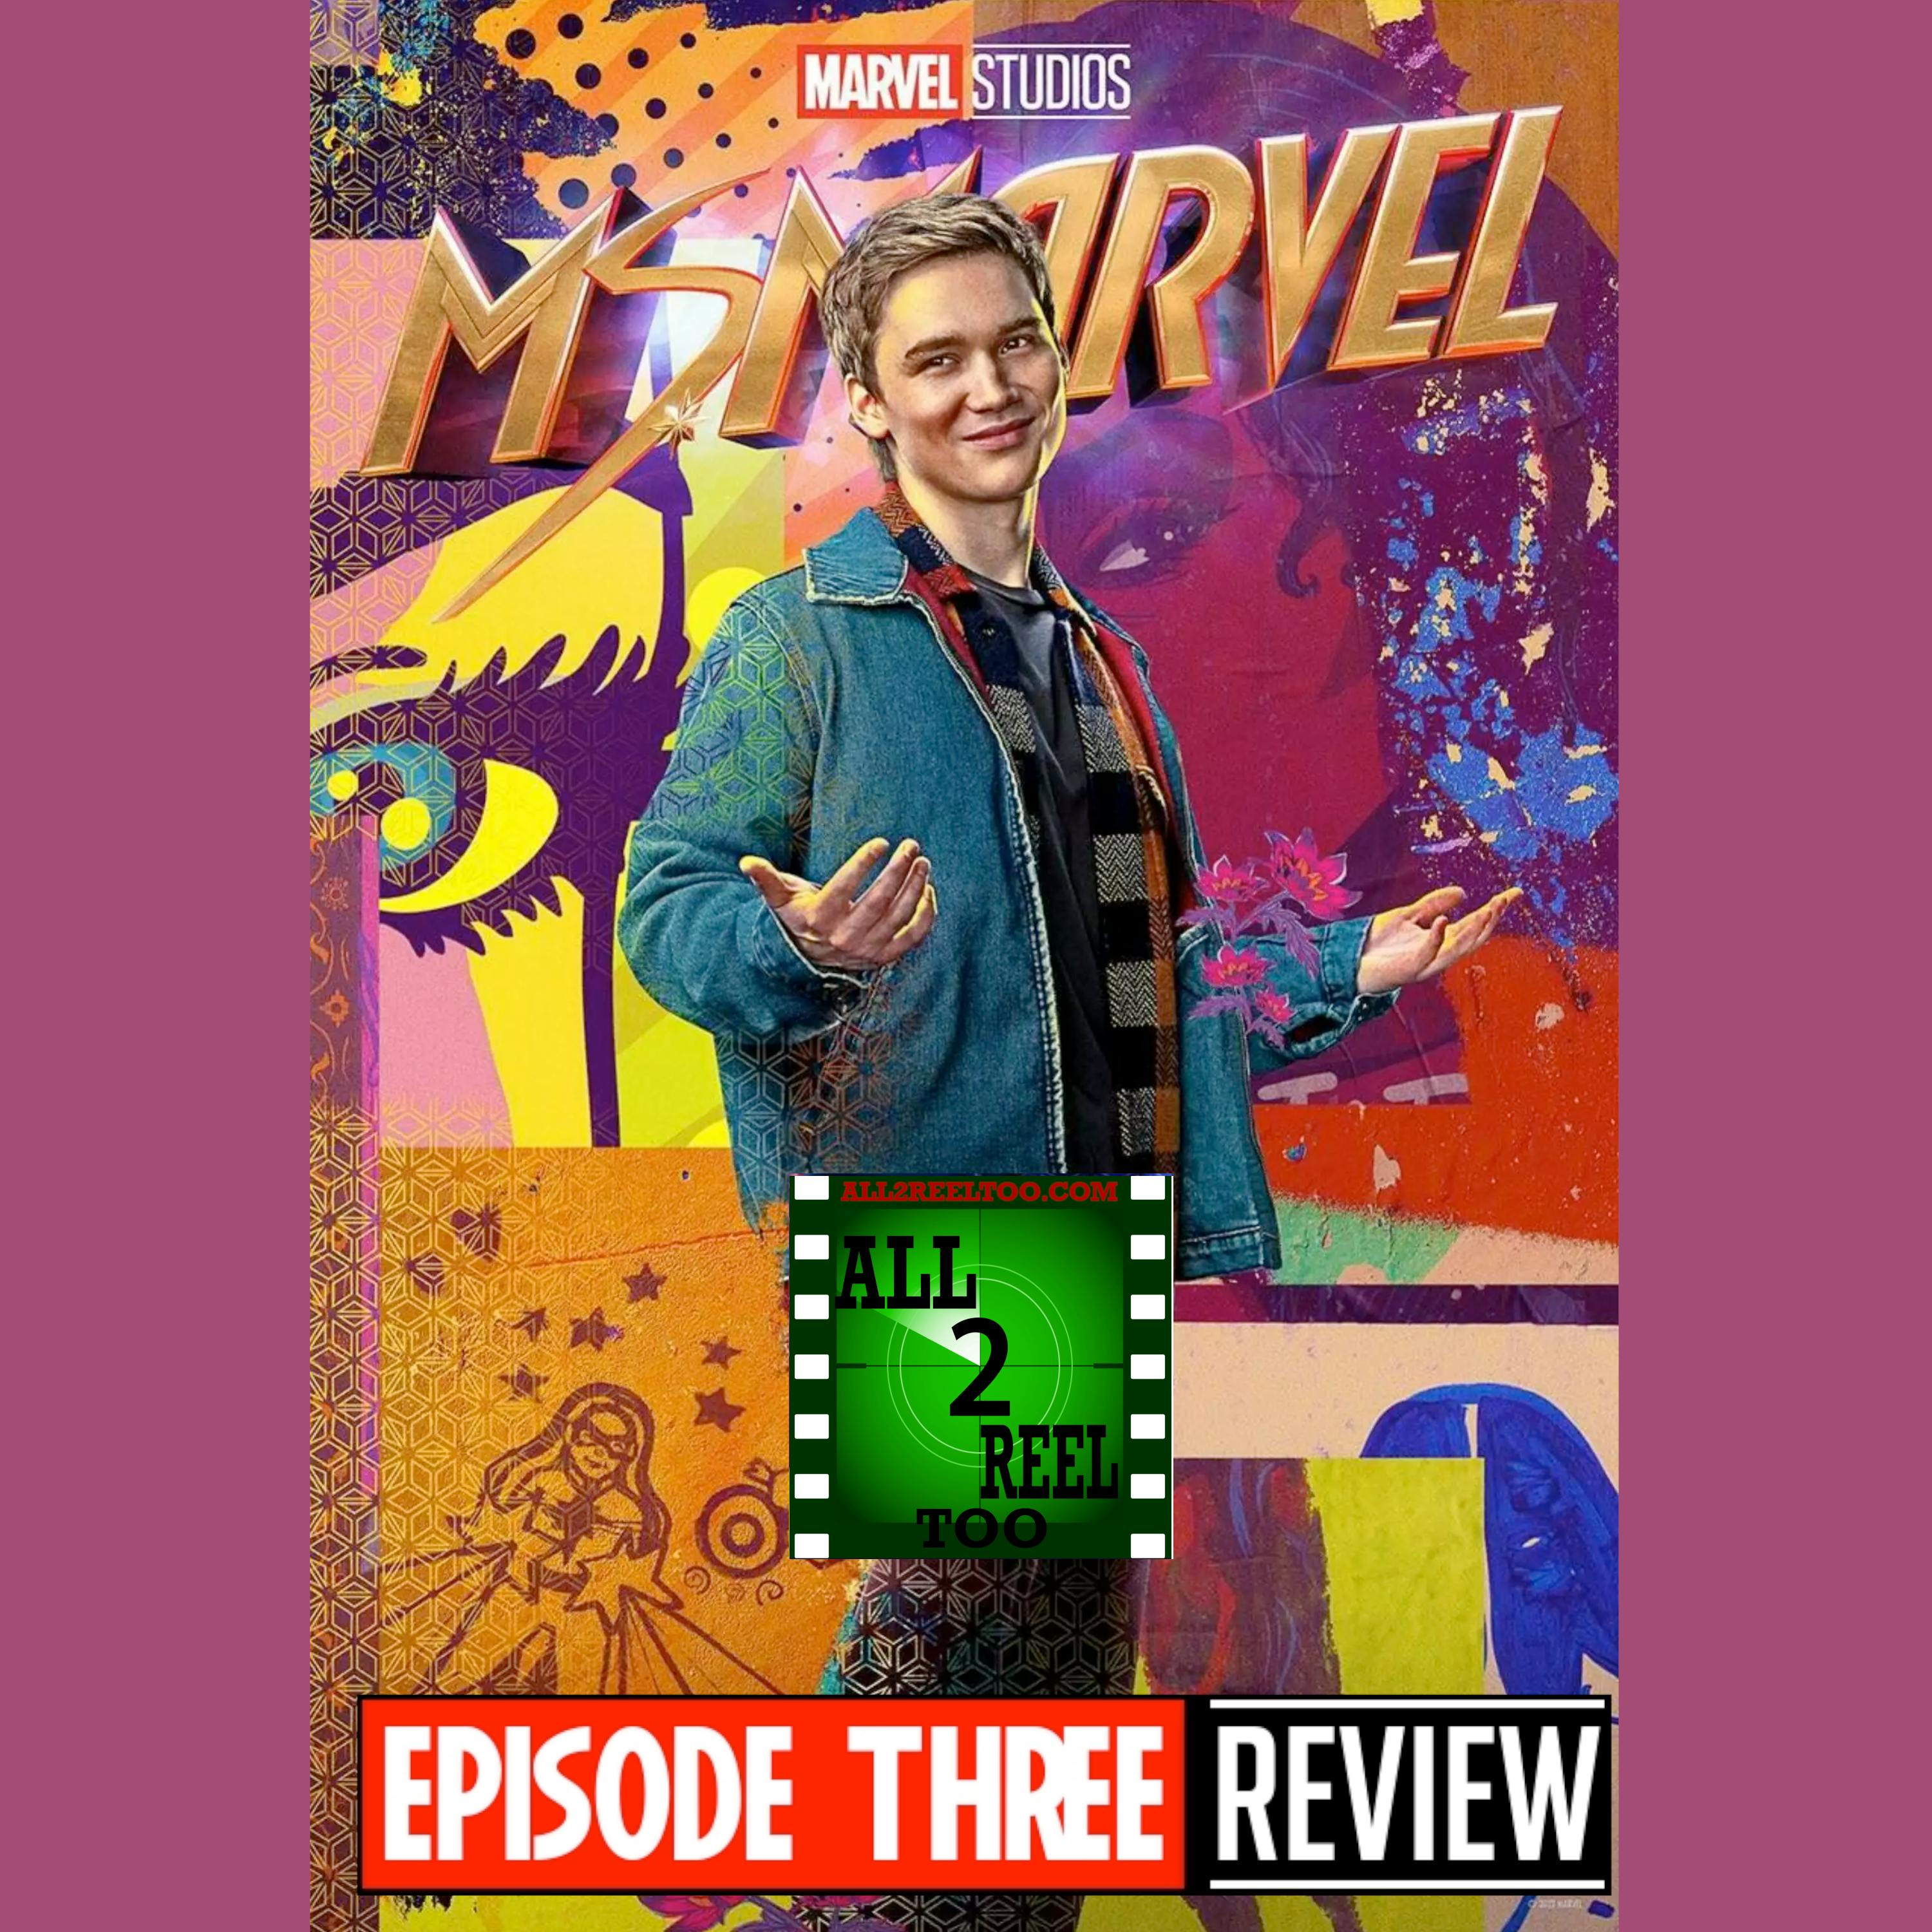 Ms. Marvel EPISODE 3 REVIEW